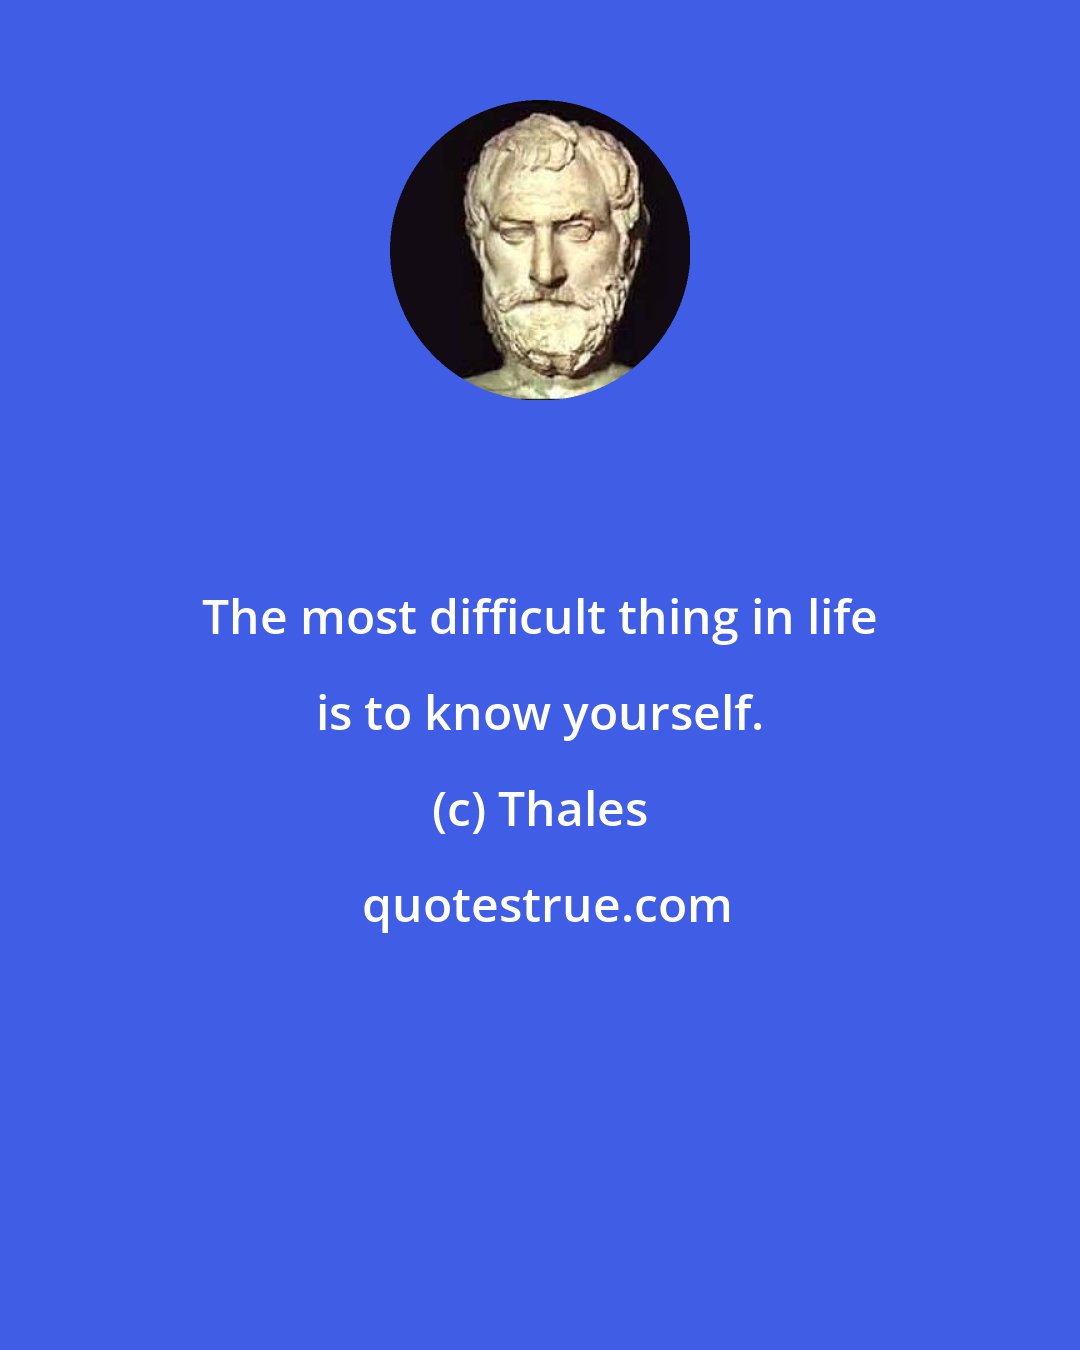 Thales: The most difficult thing in life is to know yourself.